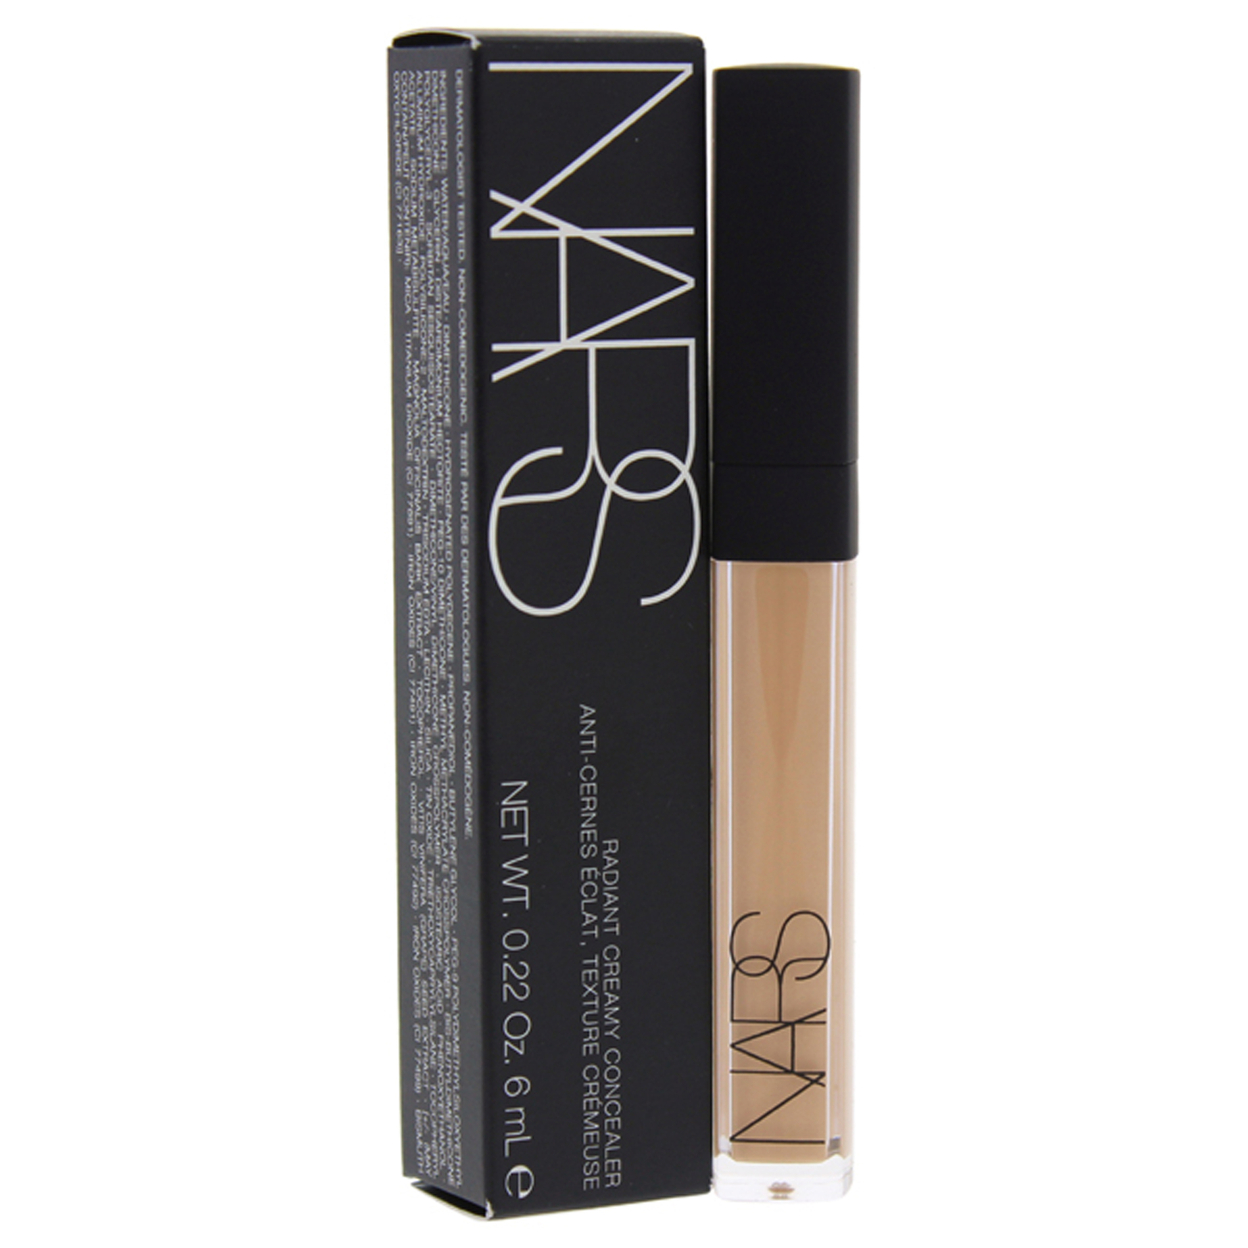 NARS Women COSMETIC Radiant Creamy Concealer - # 2.75 Cannelle/Light 0.22 Oz